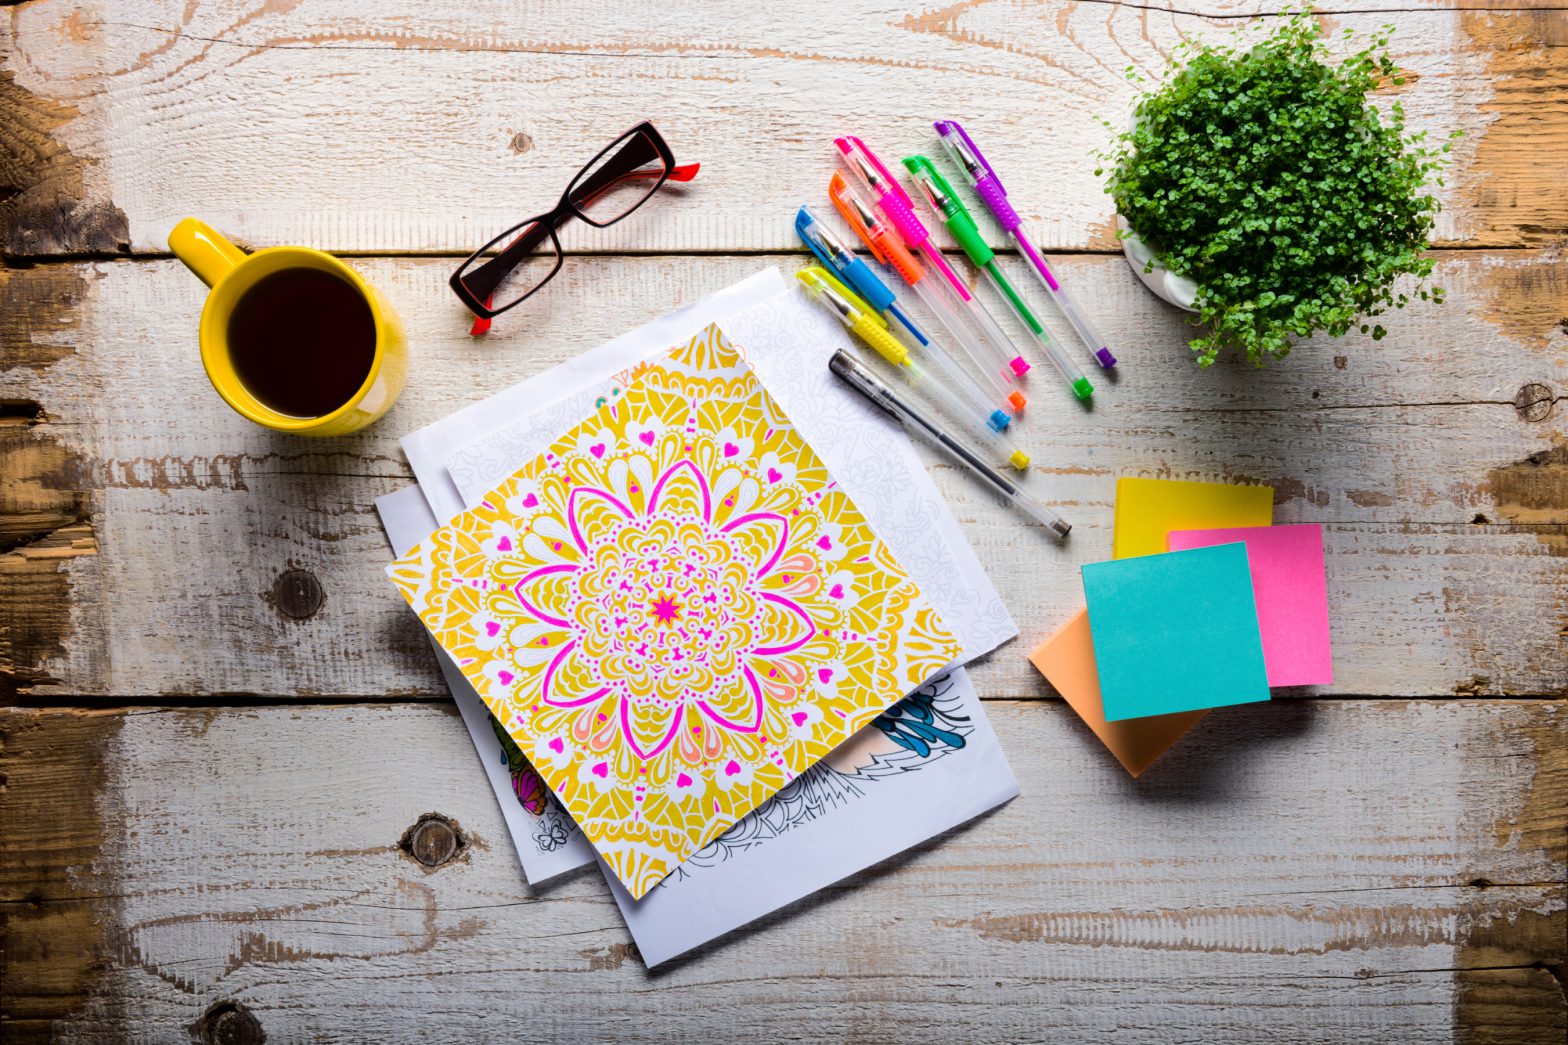 Adult Coloring Books Can Reduce Stress